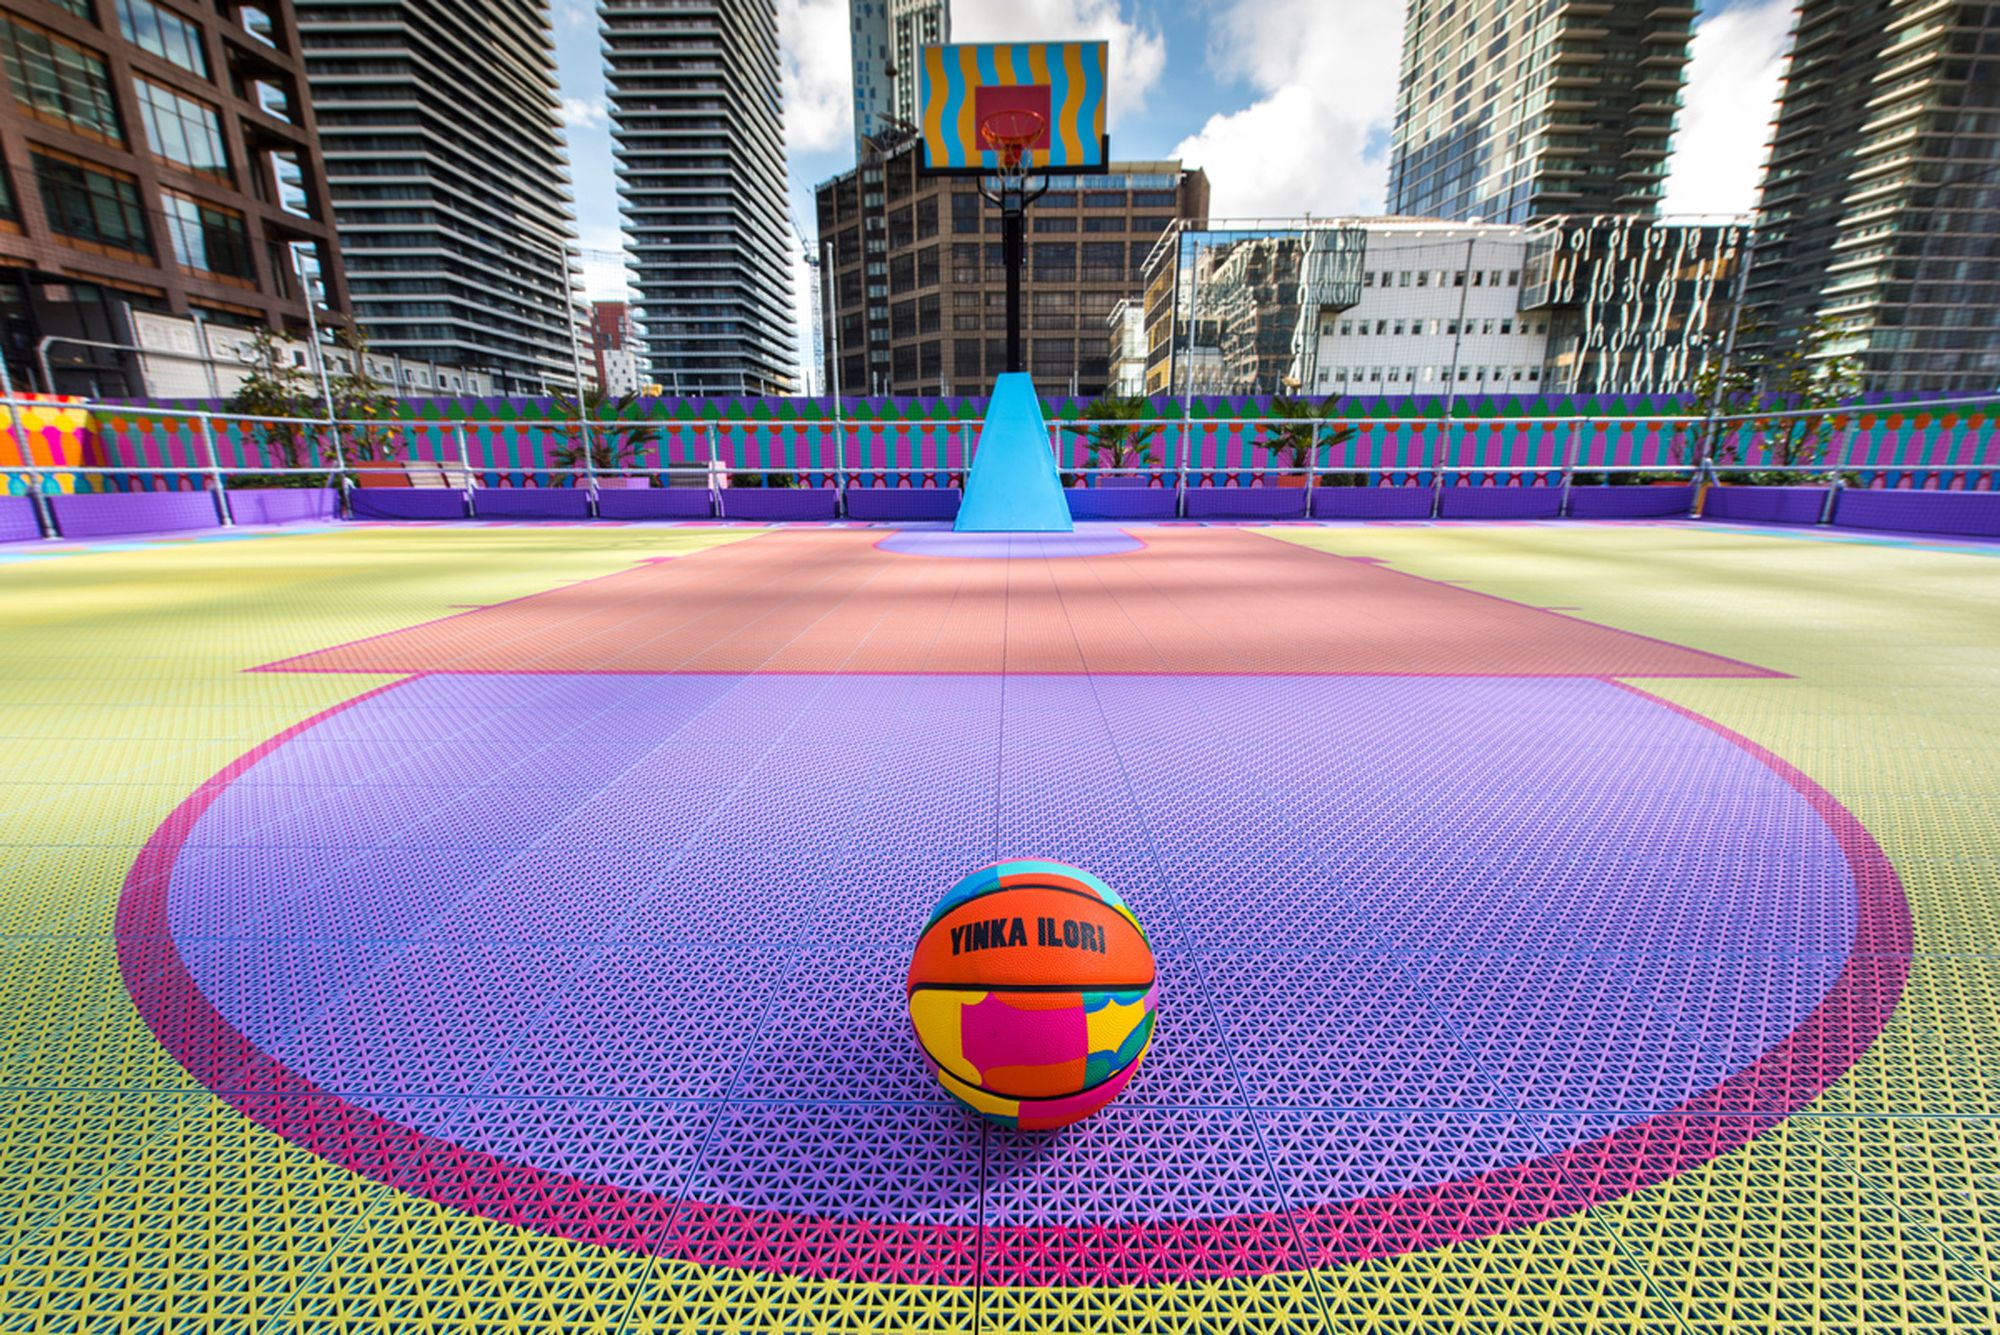 London’s newest basketball court gets 3D-printed